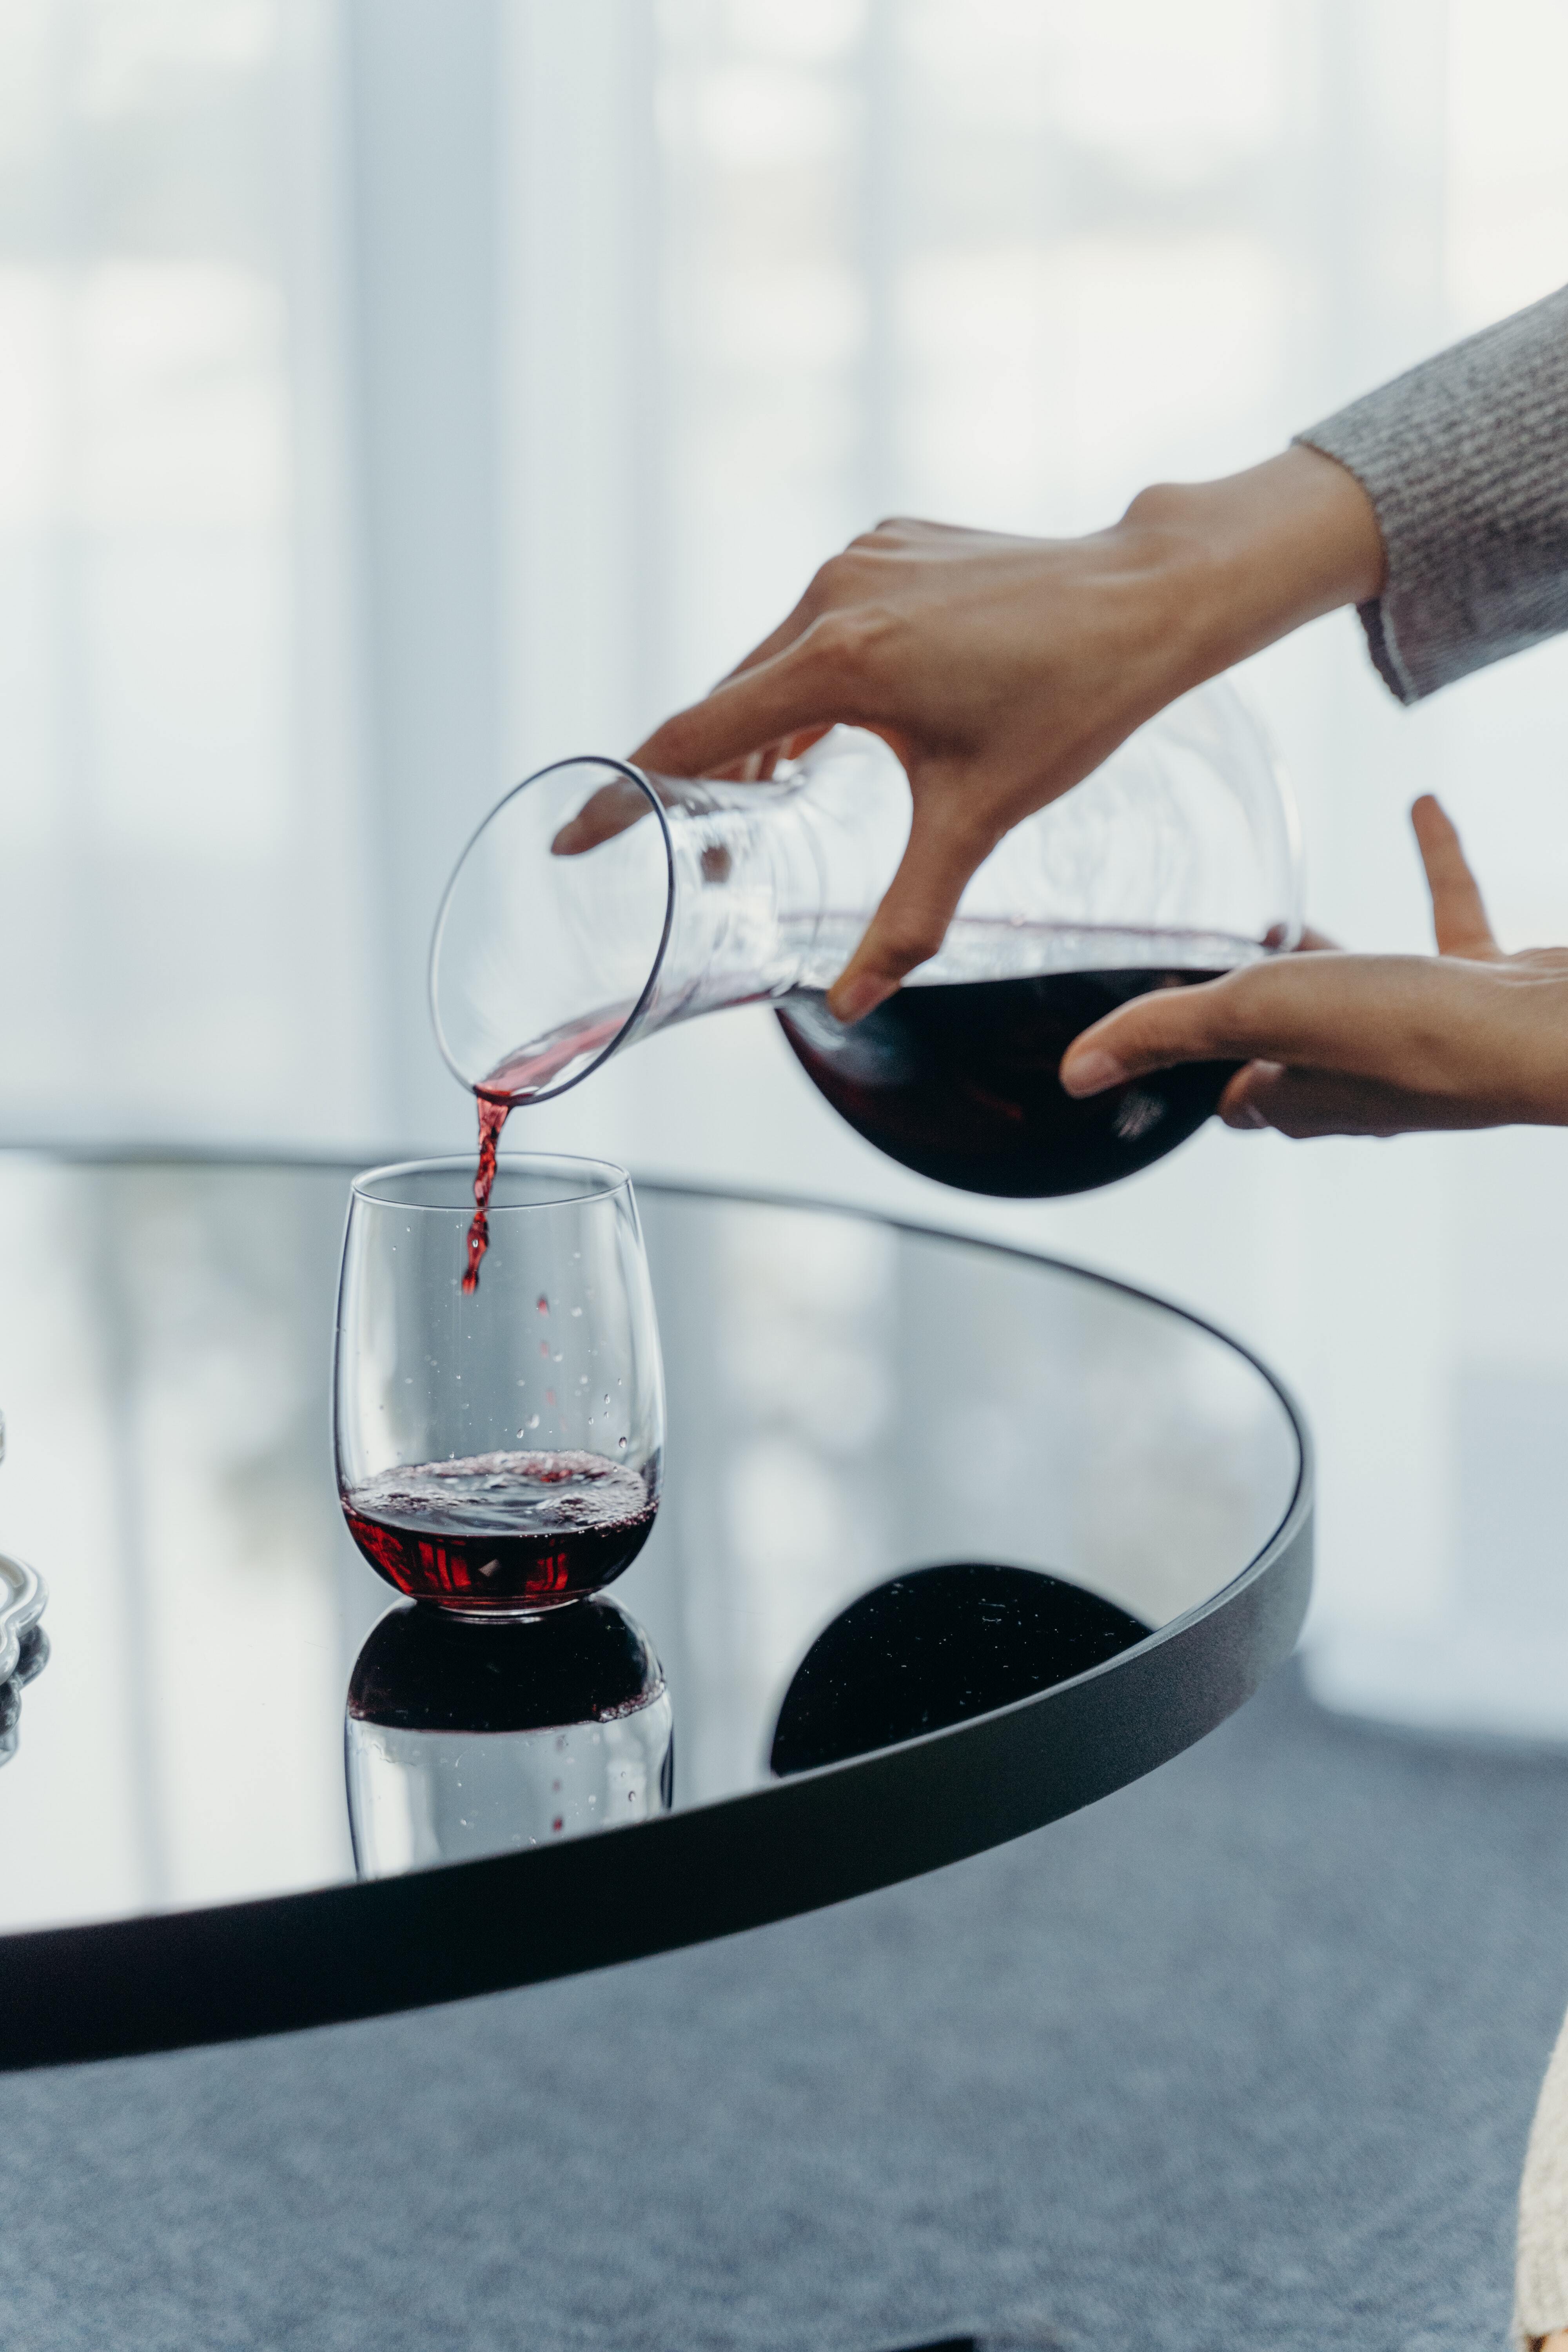 https://latahcreek.com/assets/uploads/gallery/The-Art-of-Decanting-Unleashing-the-Full-Potential-of-Your-Wine.jpg